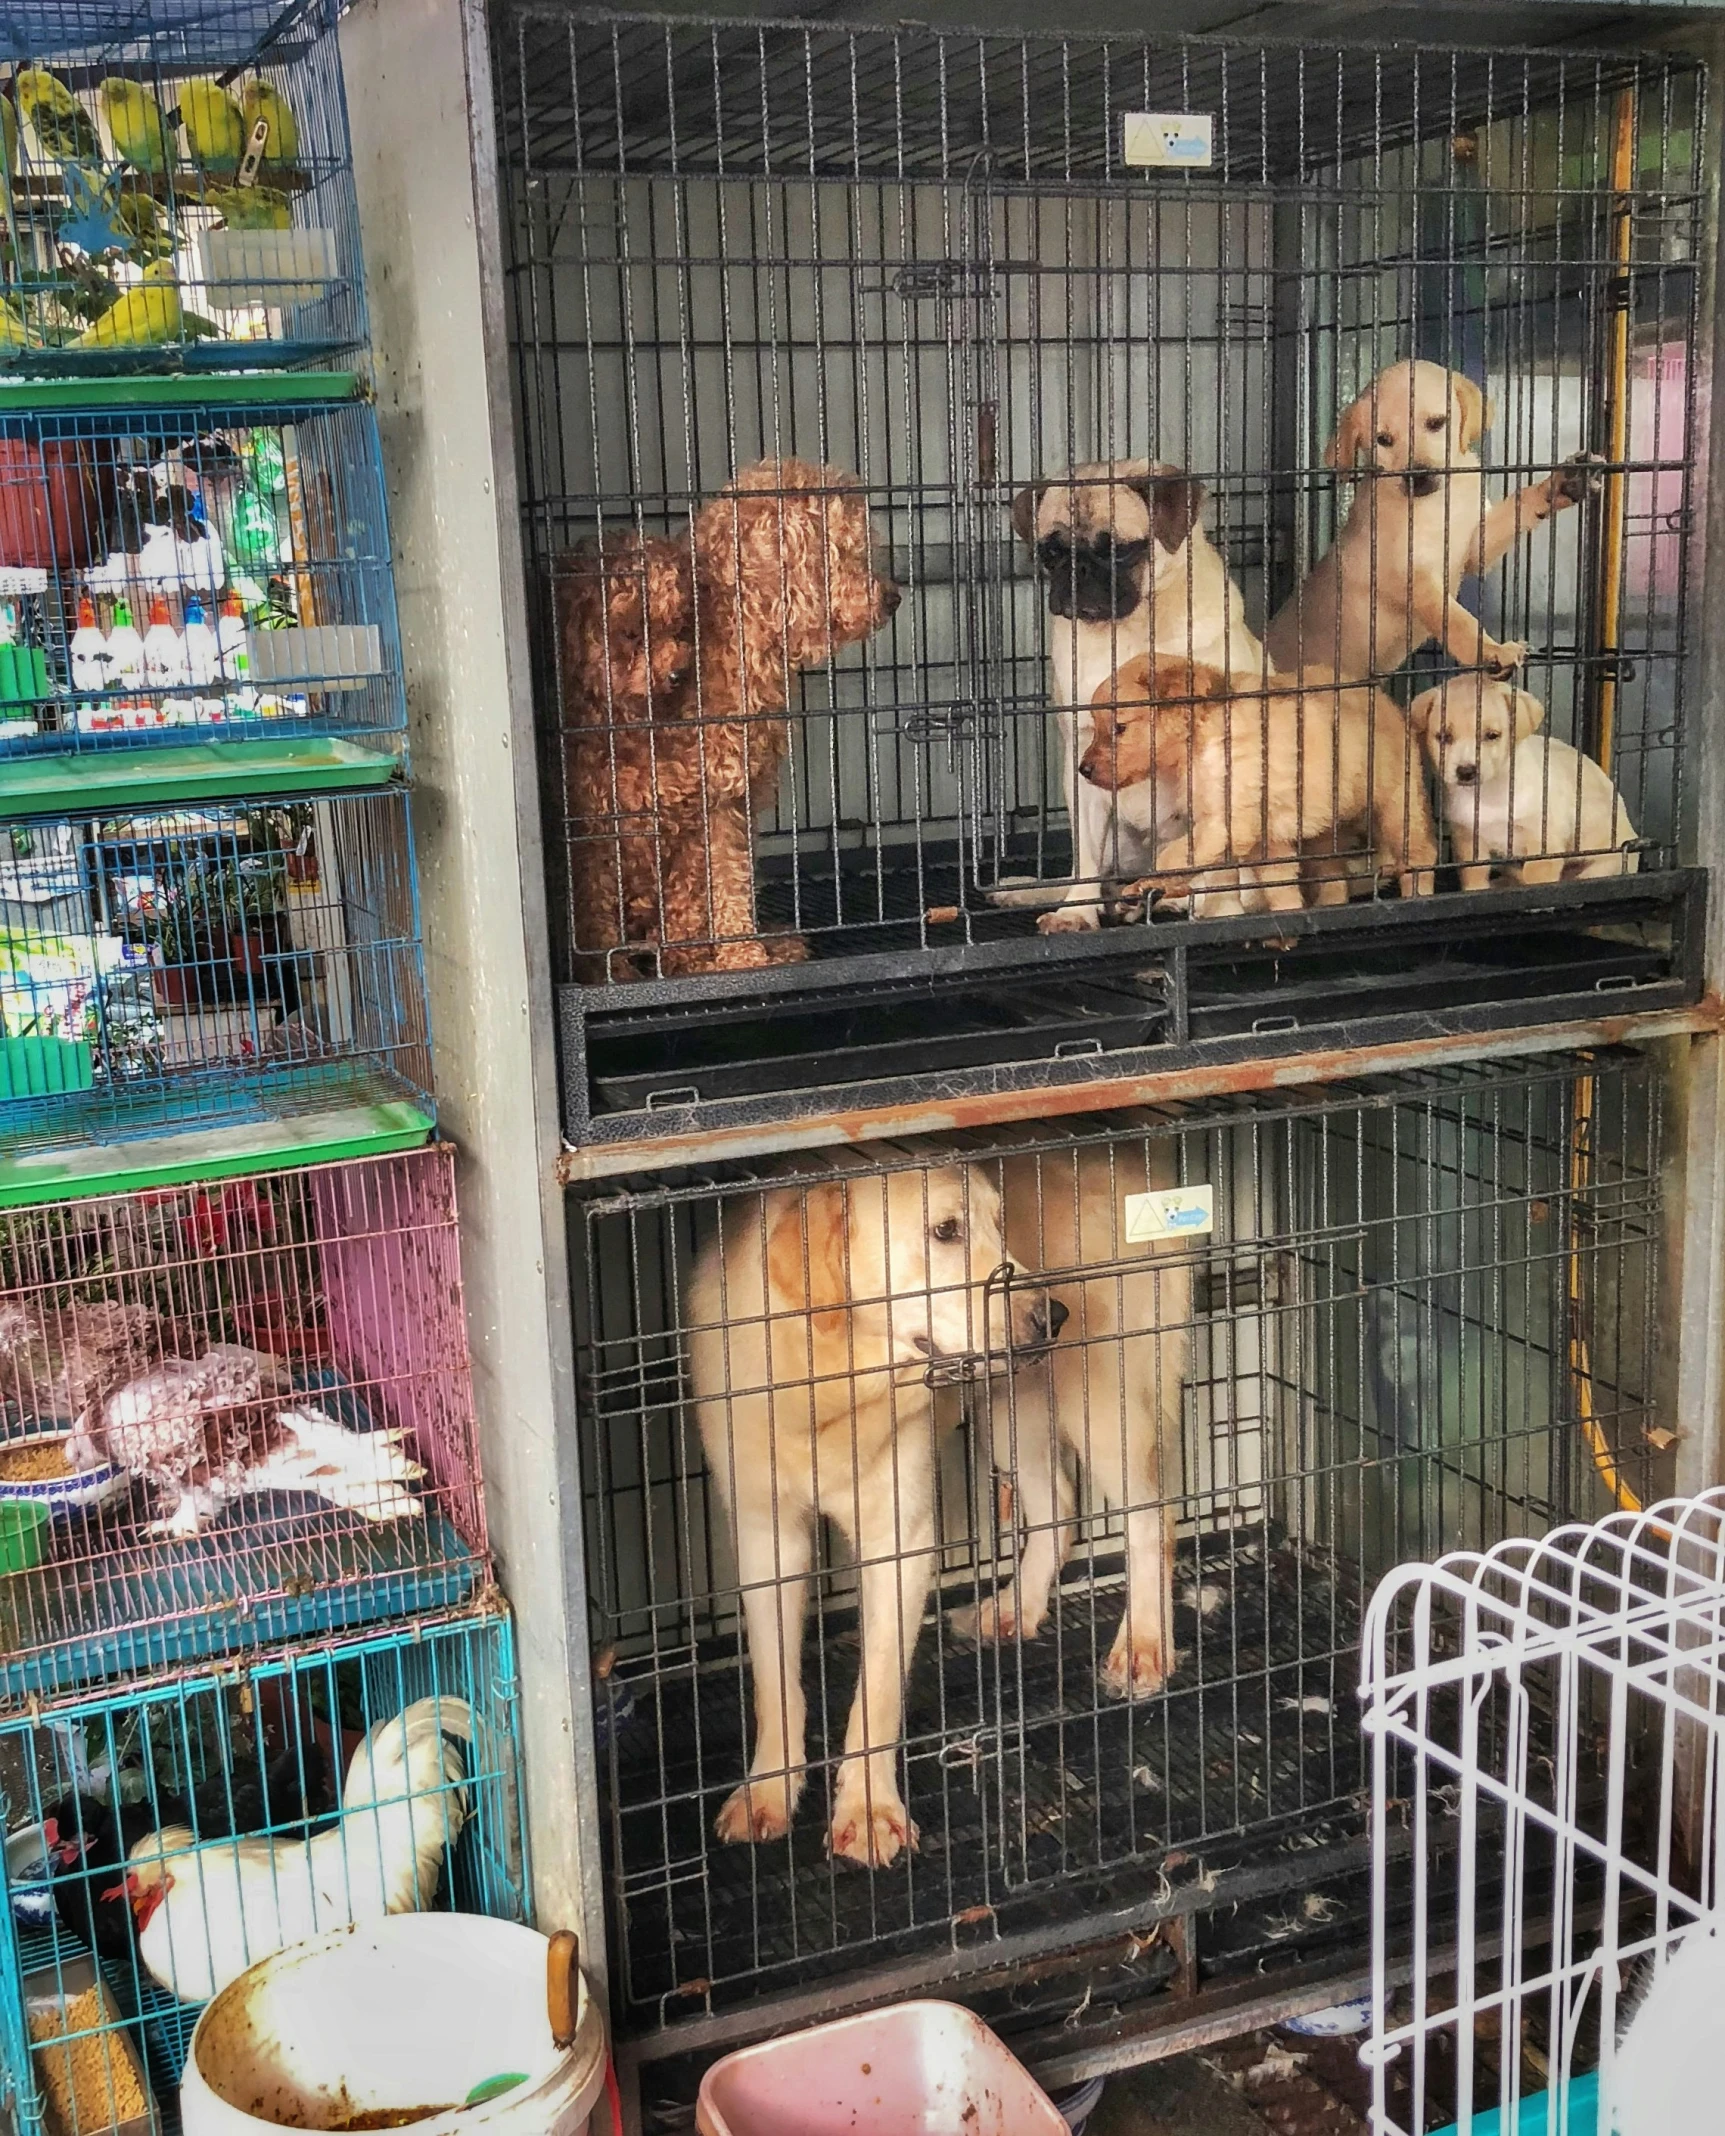 cages filled with different types of dogs in front of a building